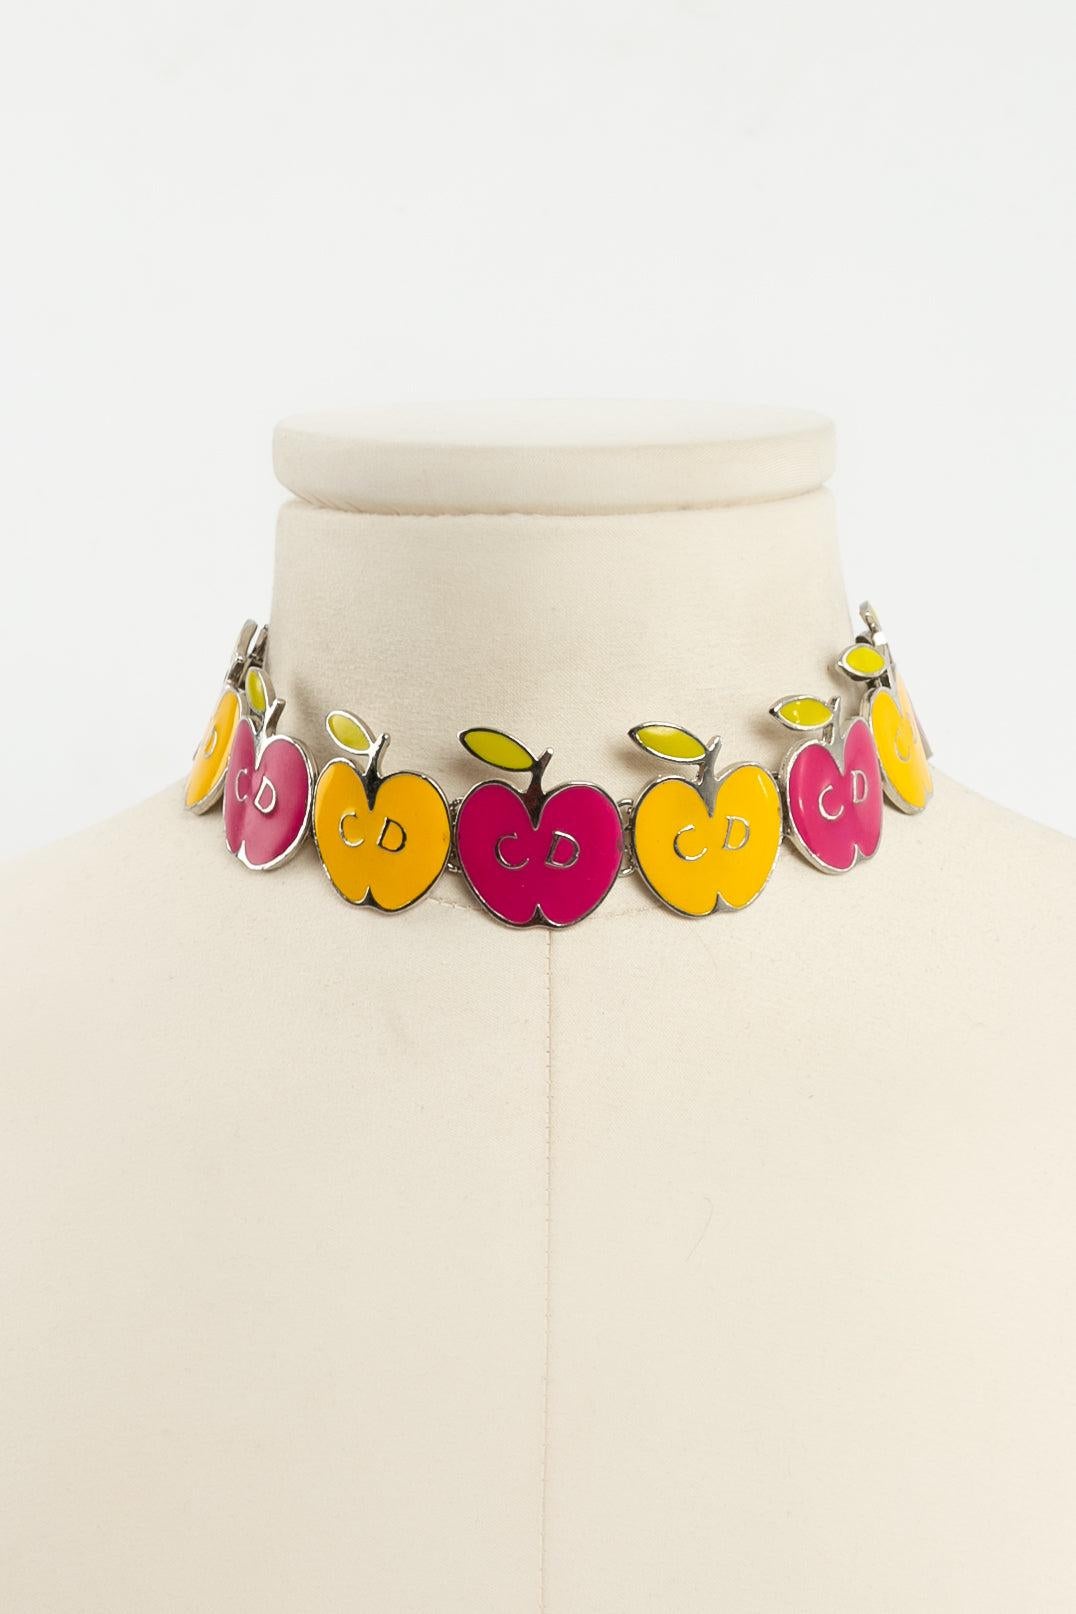 Dior - Short silver-plated necklace representing yellow and pink enameled apples. Signed on a plate.

Additional information: 
Dimensions: 41.5 cm (16.34 in) x 2 cm (0.79 in)
Condition: Very good condition
Seller Ref number: BC230